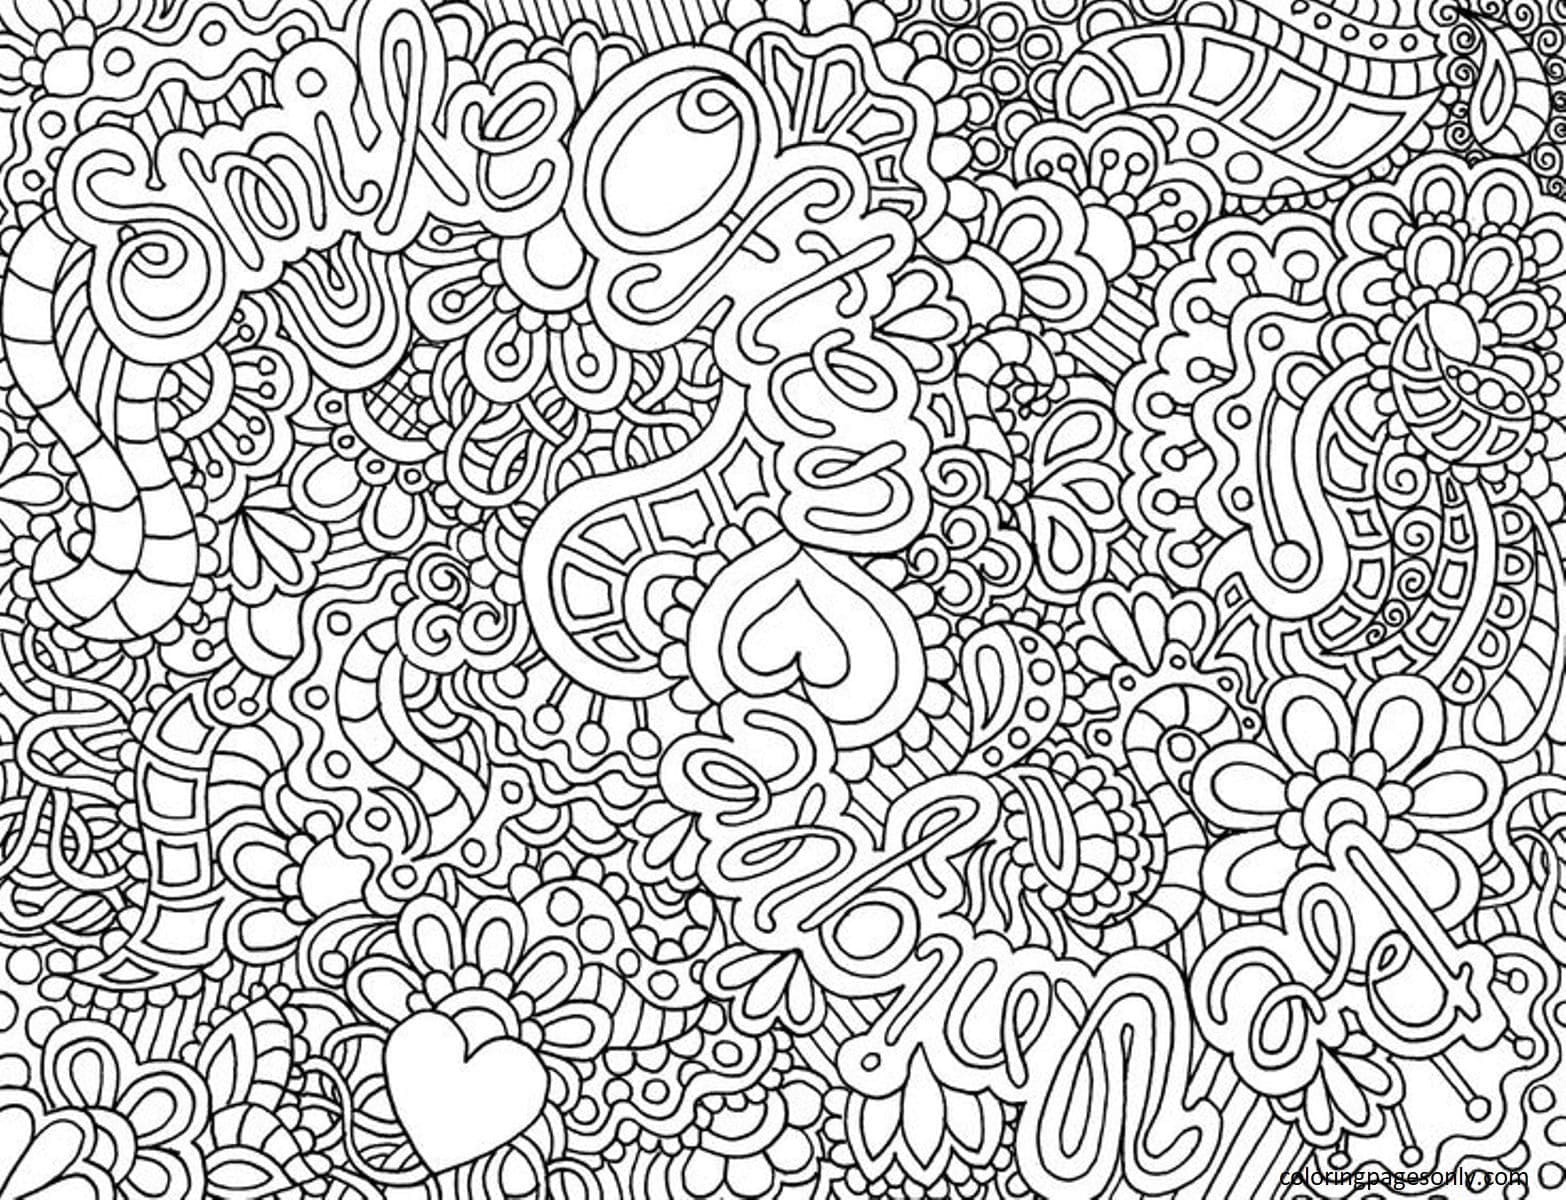 Smile Ofter Coloring Page